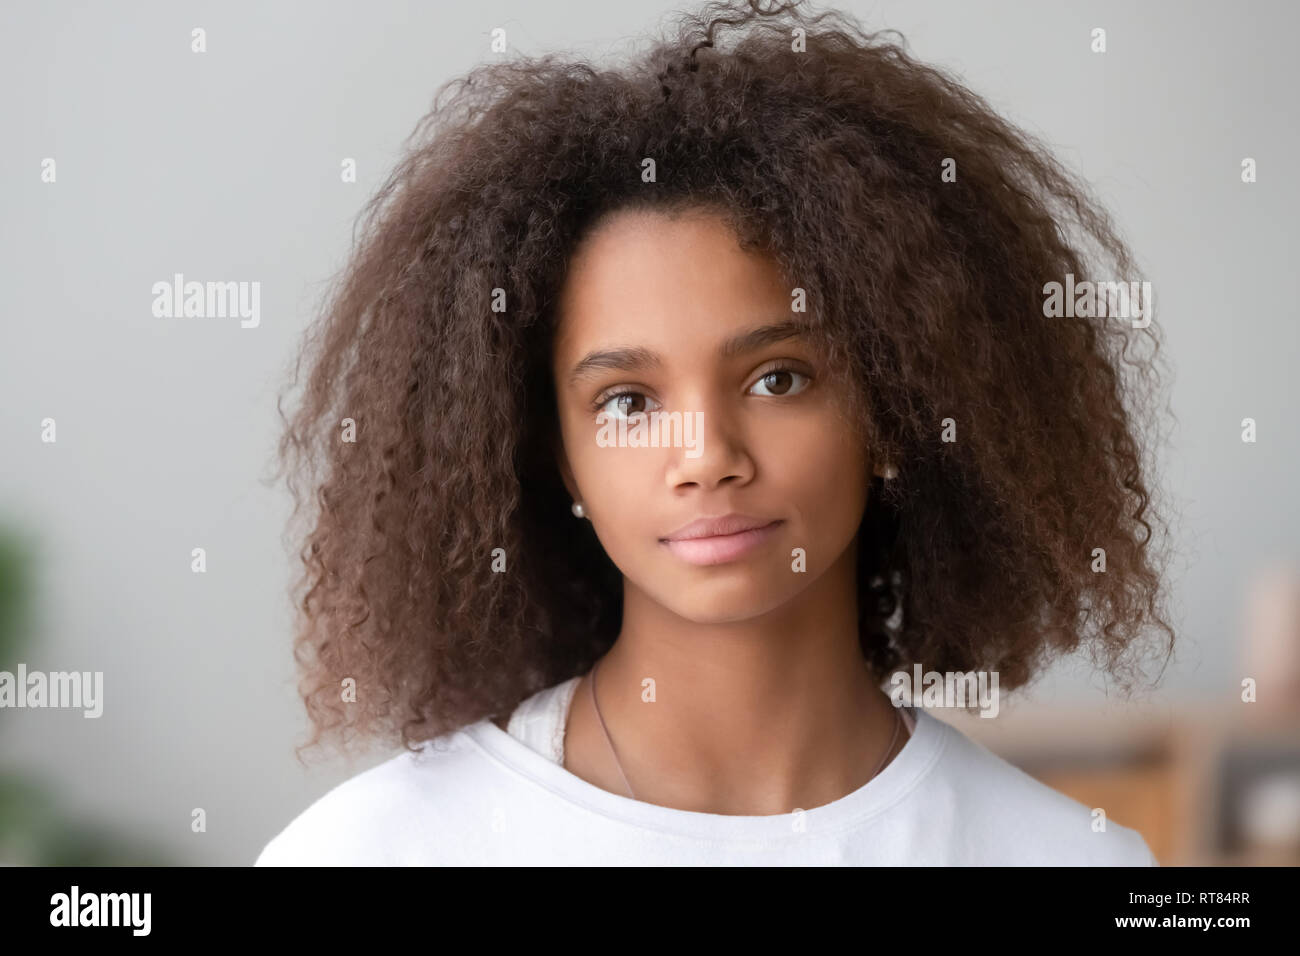 Head shot portrait attractive african teenager girl looking at camera Stock Photo